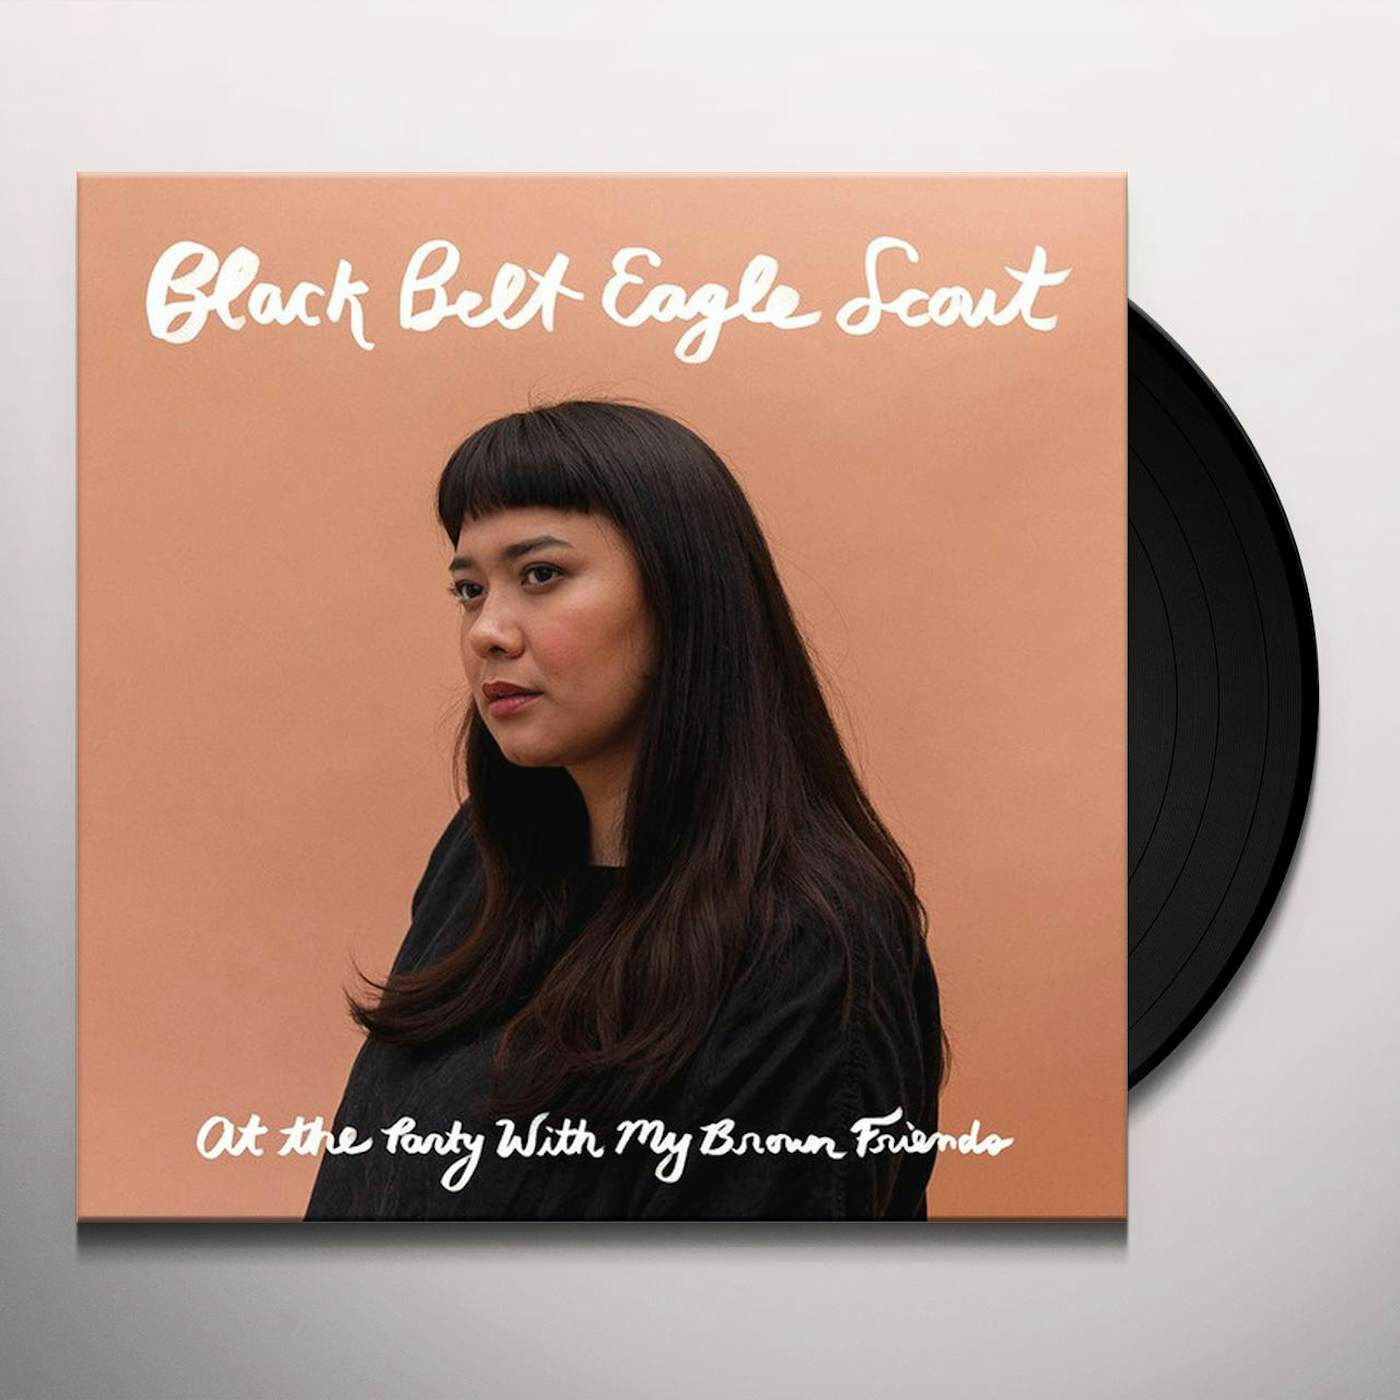 Black Belt Eagle Scout At the Party With My Brown Friends Vinyl Record